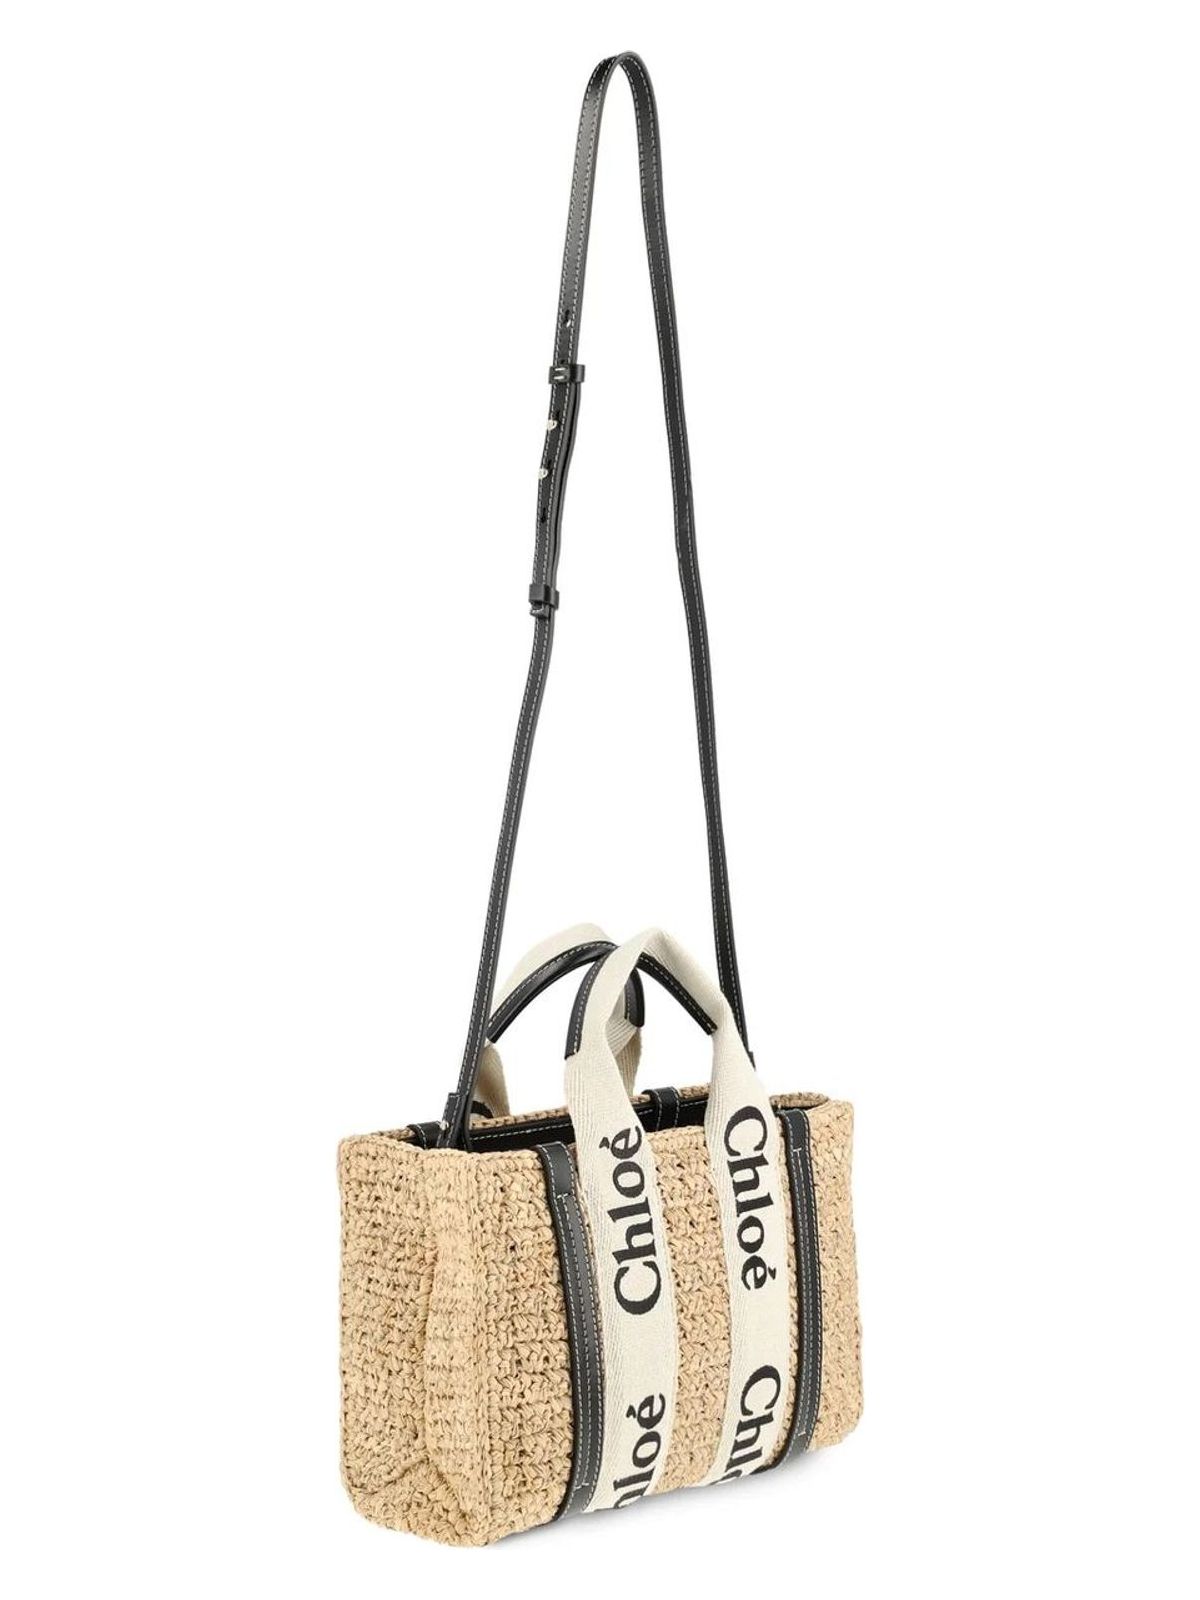 WOODY20H CHLOÉ WOODY SMALL TOTE WITH STRAP